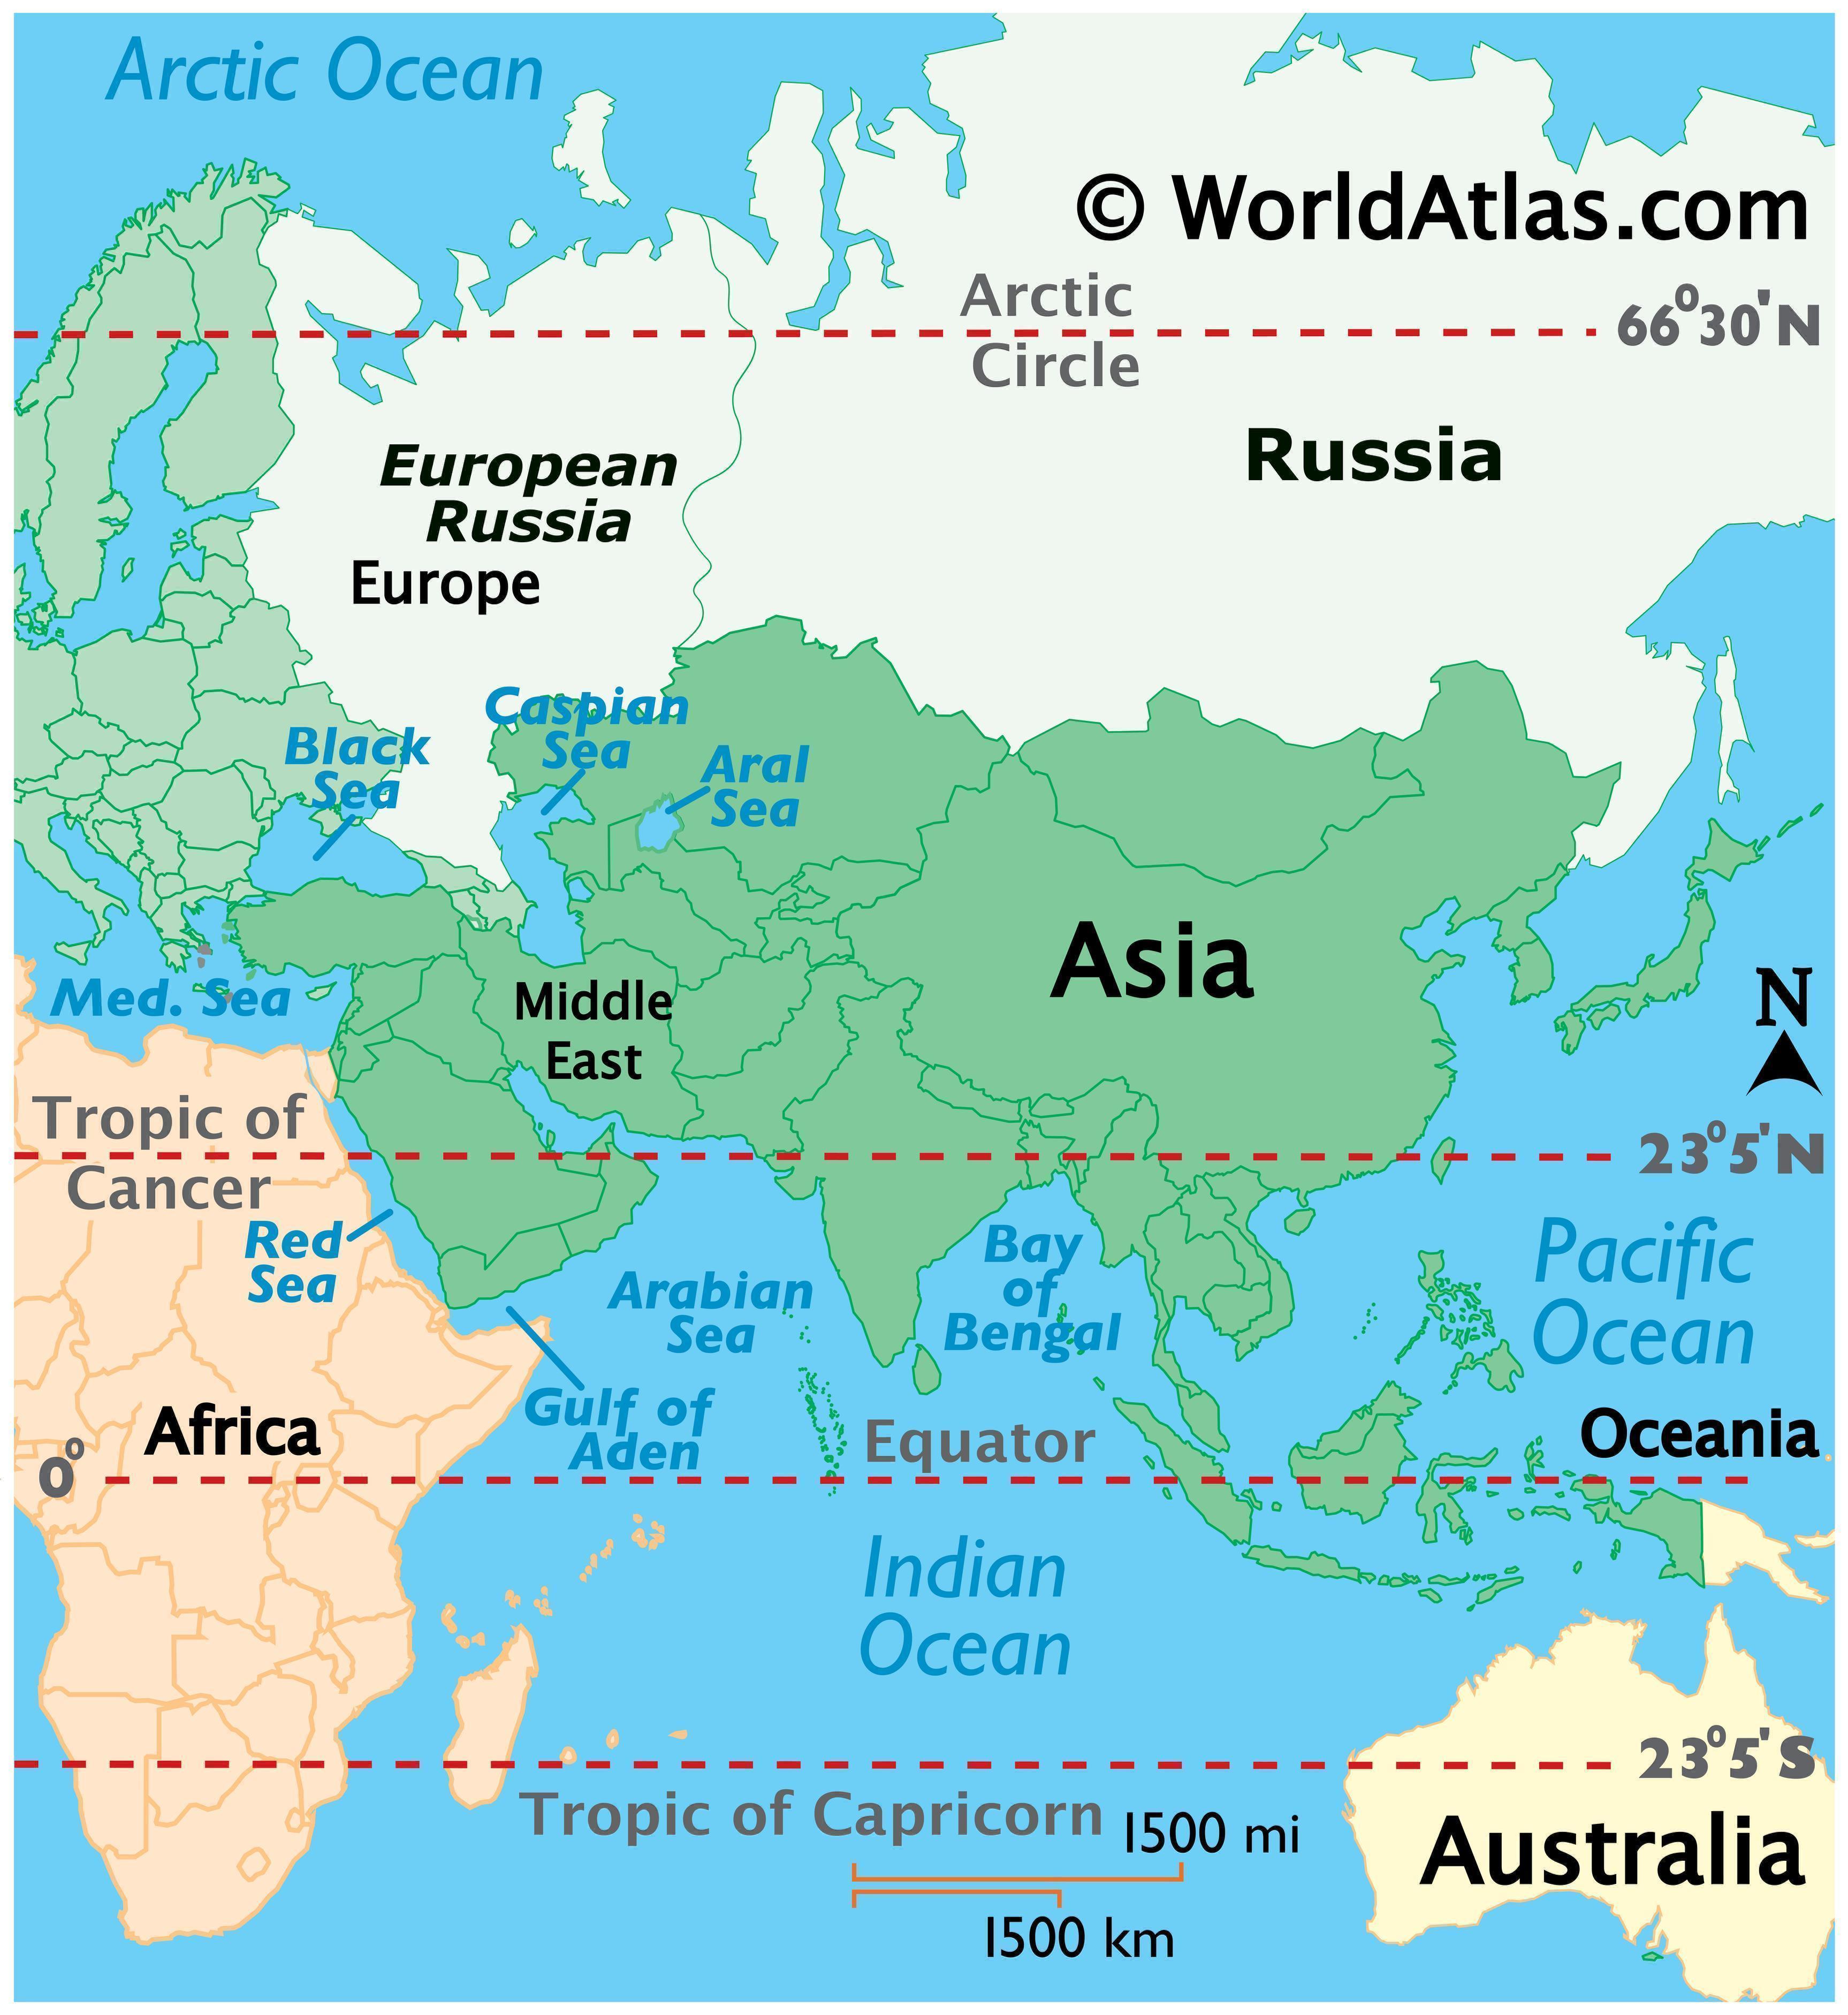 world map of moscow russia - Google Search